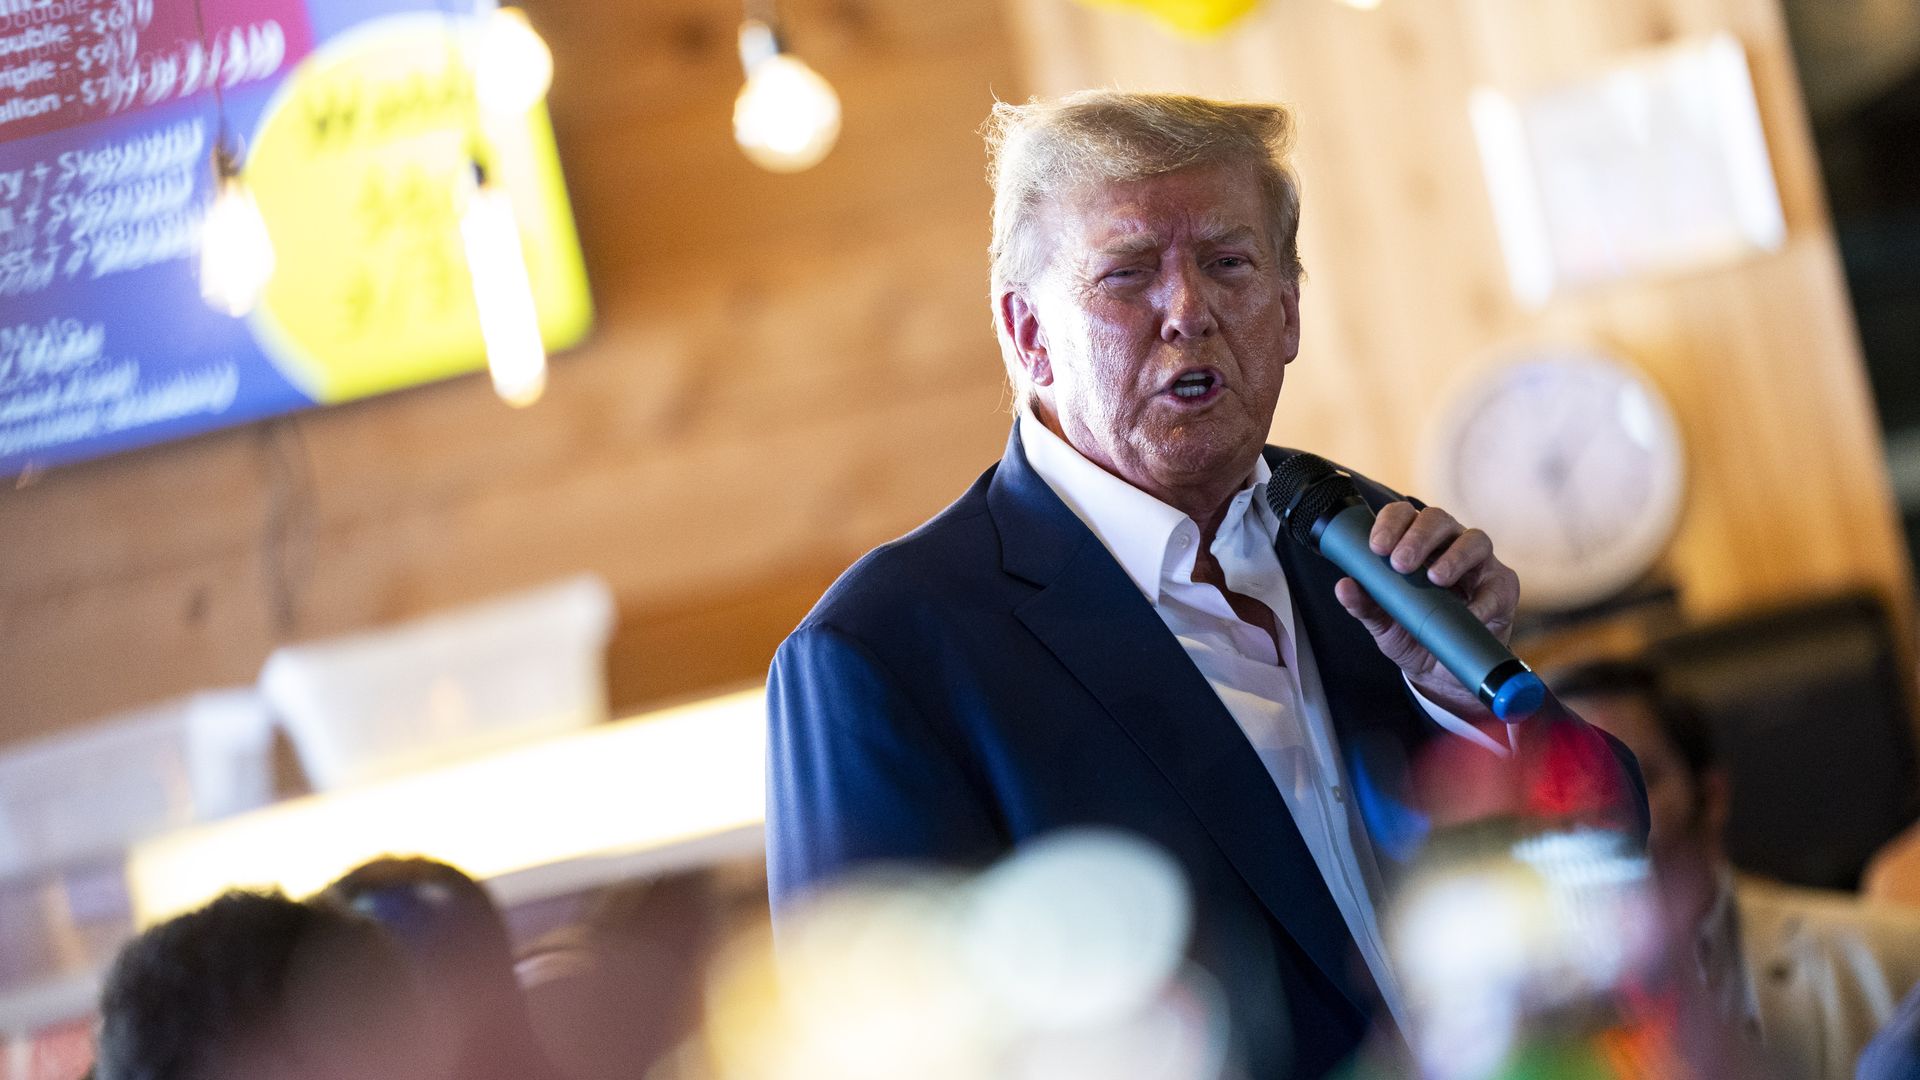 Former President Donald Trump, 2024 Republican presidential candidate, speaks at the Steer N' Stein bar while attending the Iowa State Fair in Des Moines, Iowa, US, on Saturday, Aug. 12, 2023.